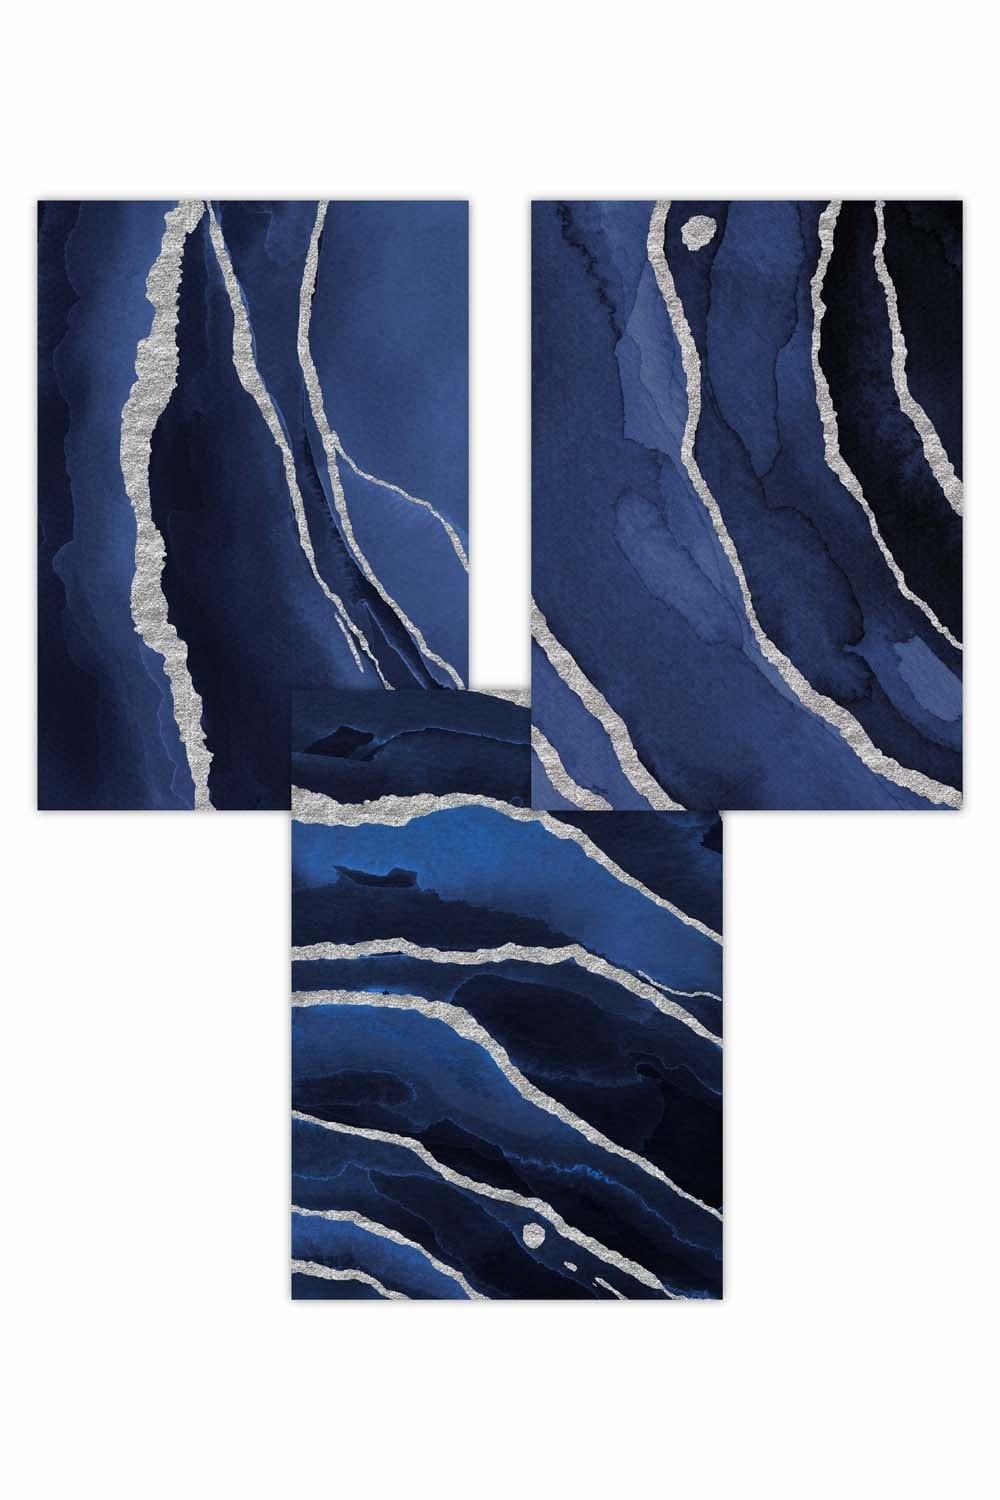 Set of 3 Abstract Navy Blue Silver Strokes Art Posters